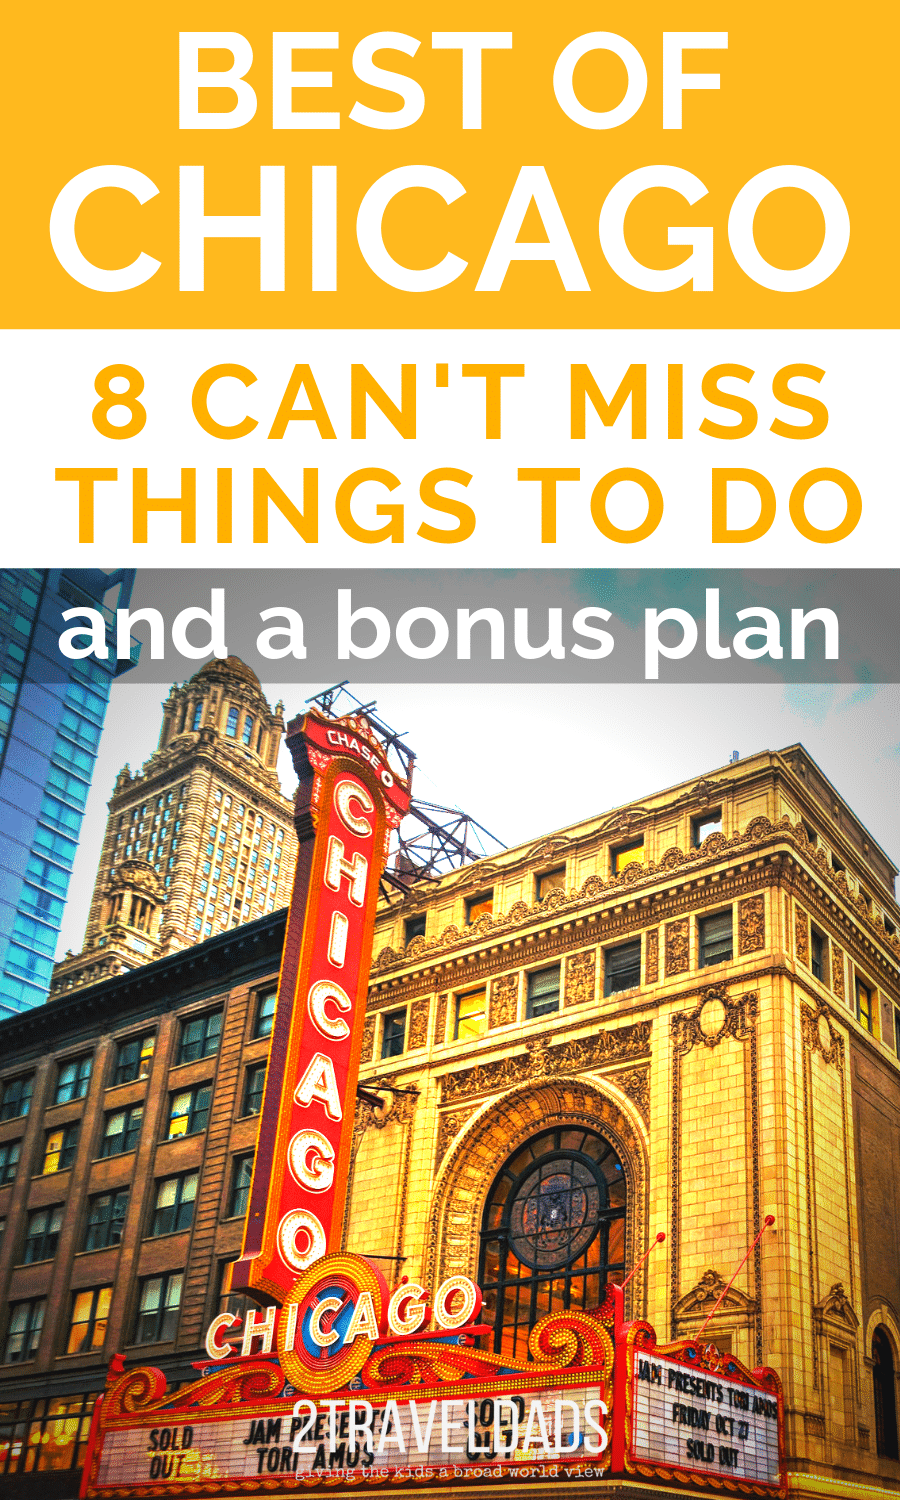 8 unforgettable activities for when you're traveling to Chicago (including a bonus plan) for exploring the city and seeing the best of the best. Art, Chicago architecture, when to stay and more. #Chicago #city #vacation #thingstodo